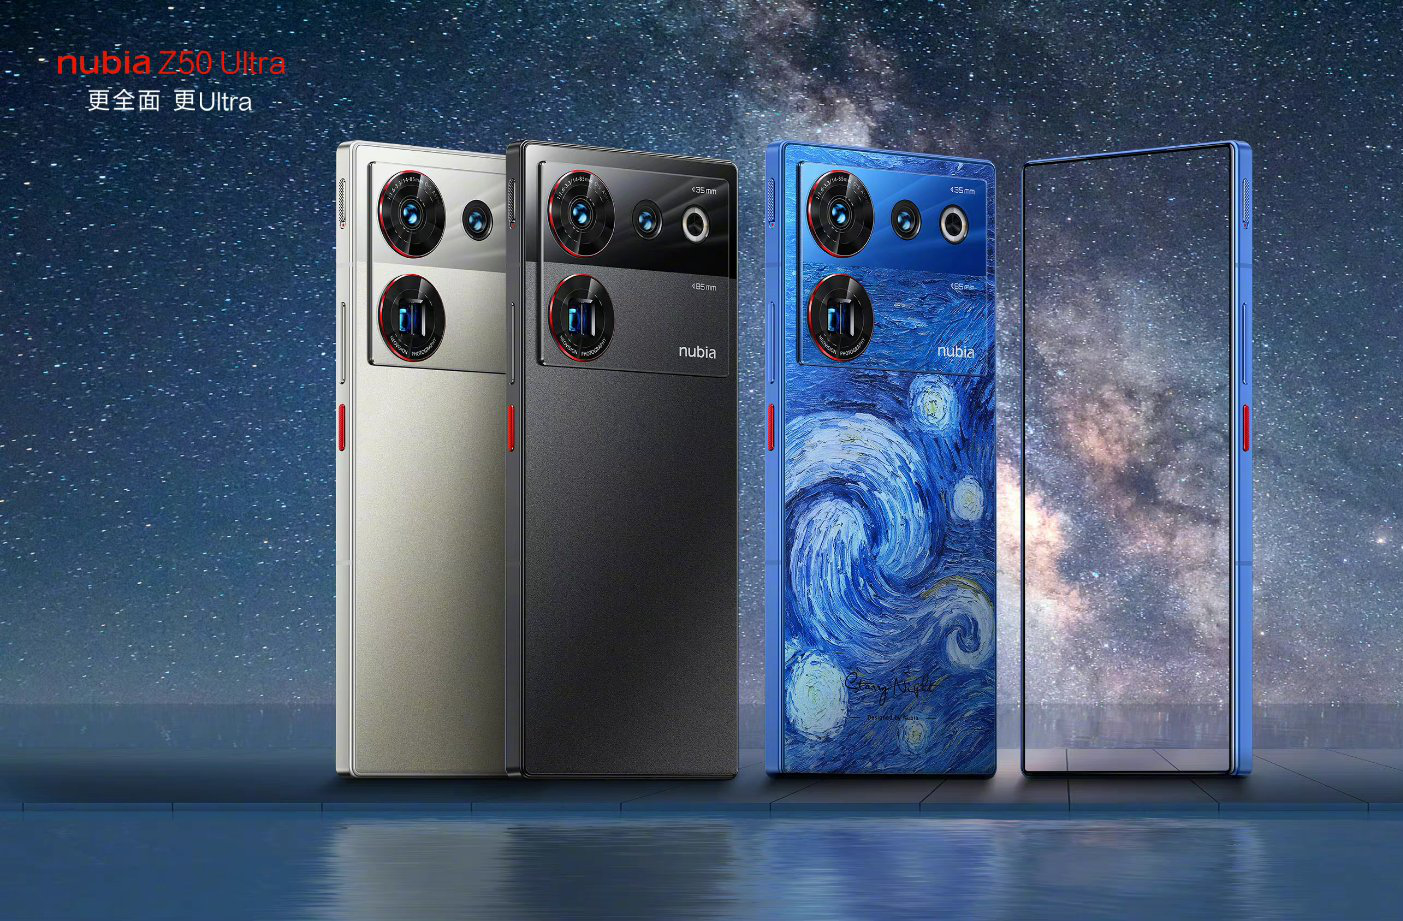 ZTE Nubia Z50 Ultra: specs, benchmarks, and user reviews